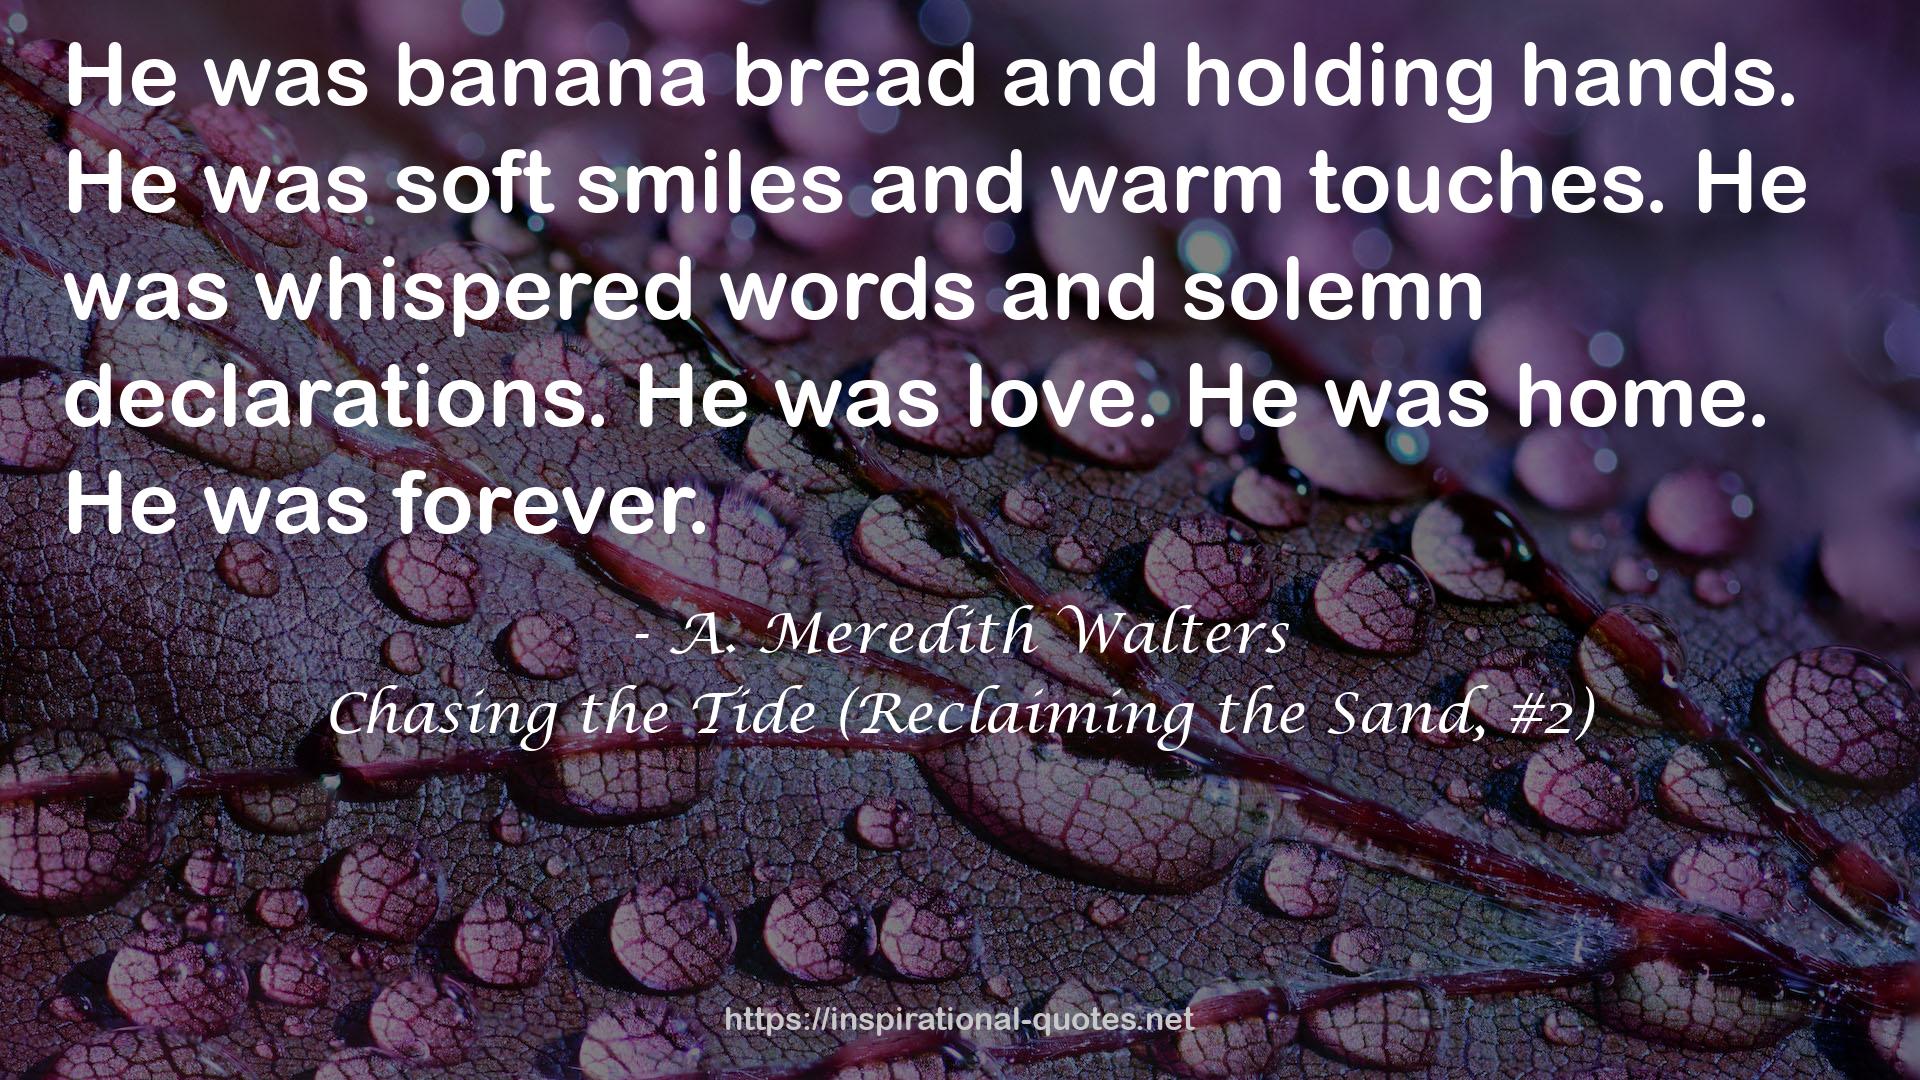 Chasing the Tide (Reclaiming the Sand, #2) QUOTES